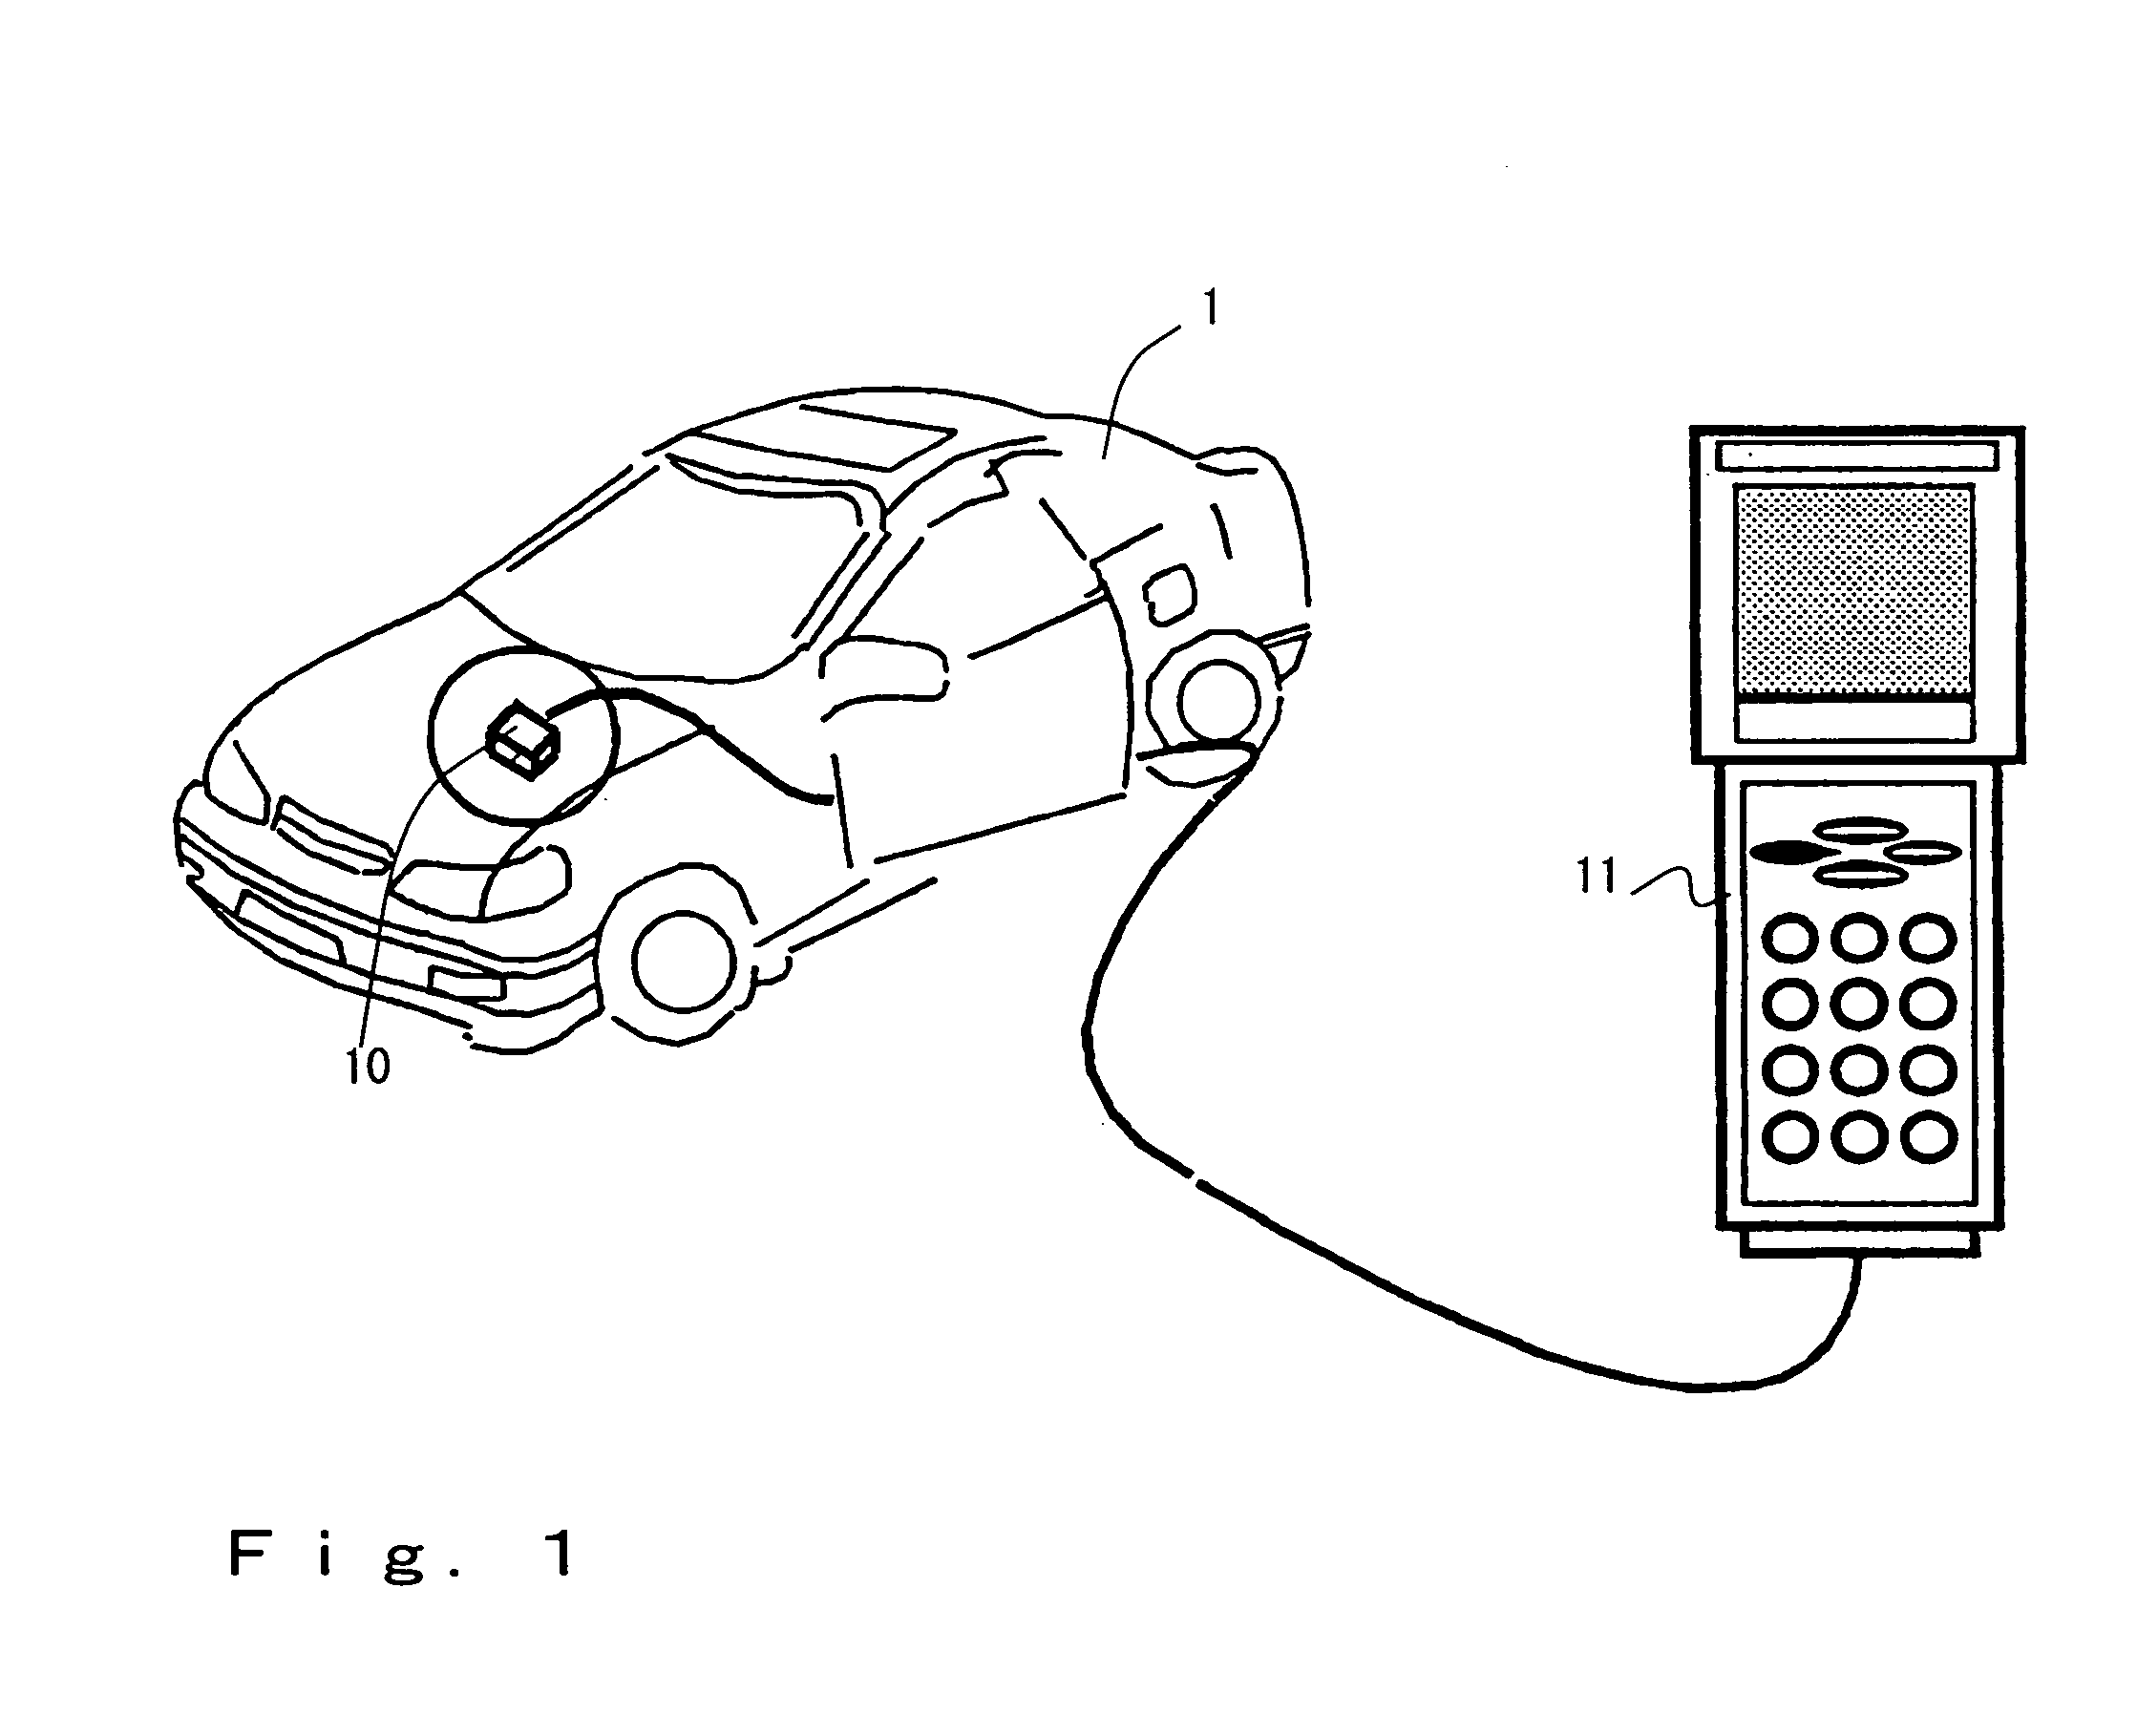 Memory rewriting system for vehicle controller